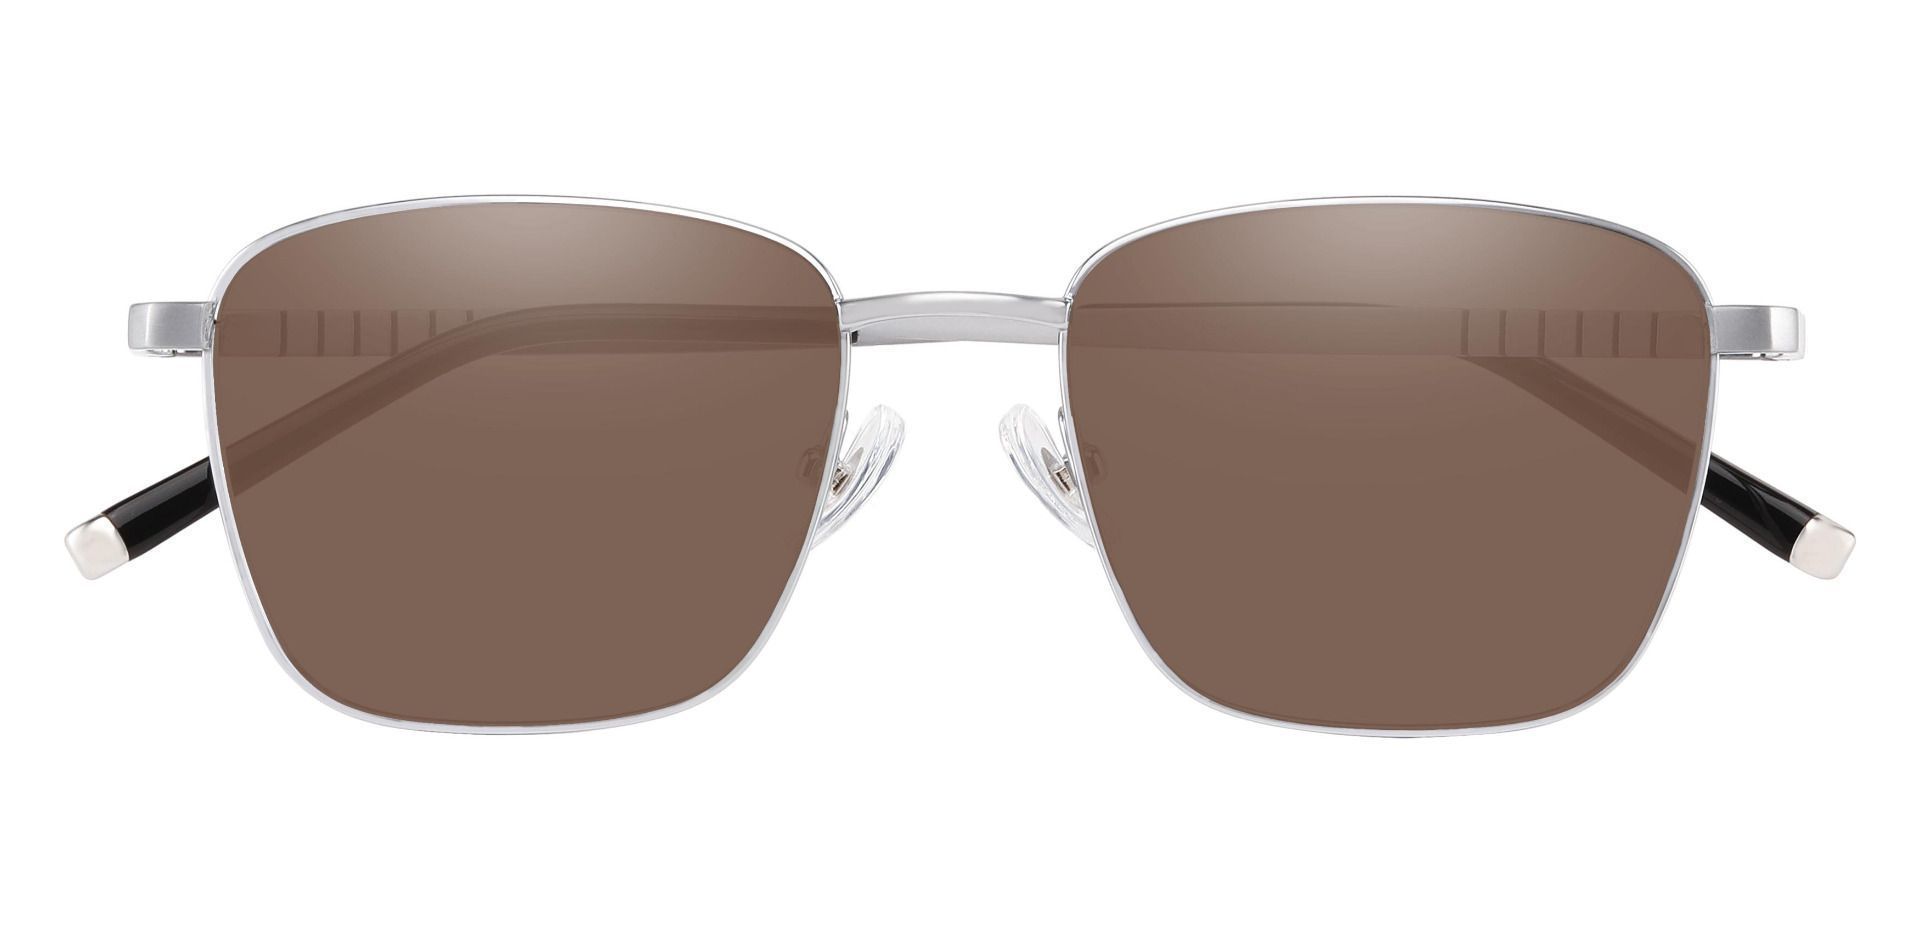 May Square Non-Rx Sunglasses - Silver Frame With Brown Lenses